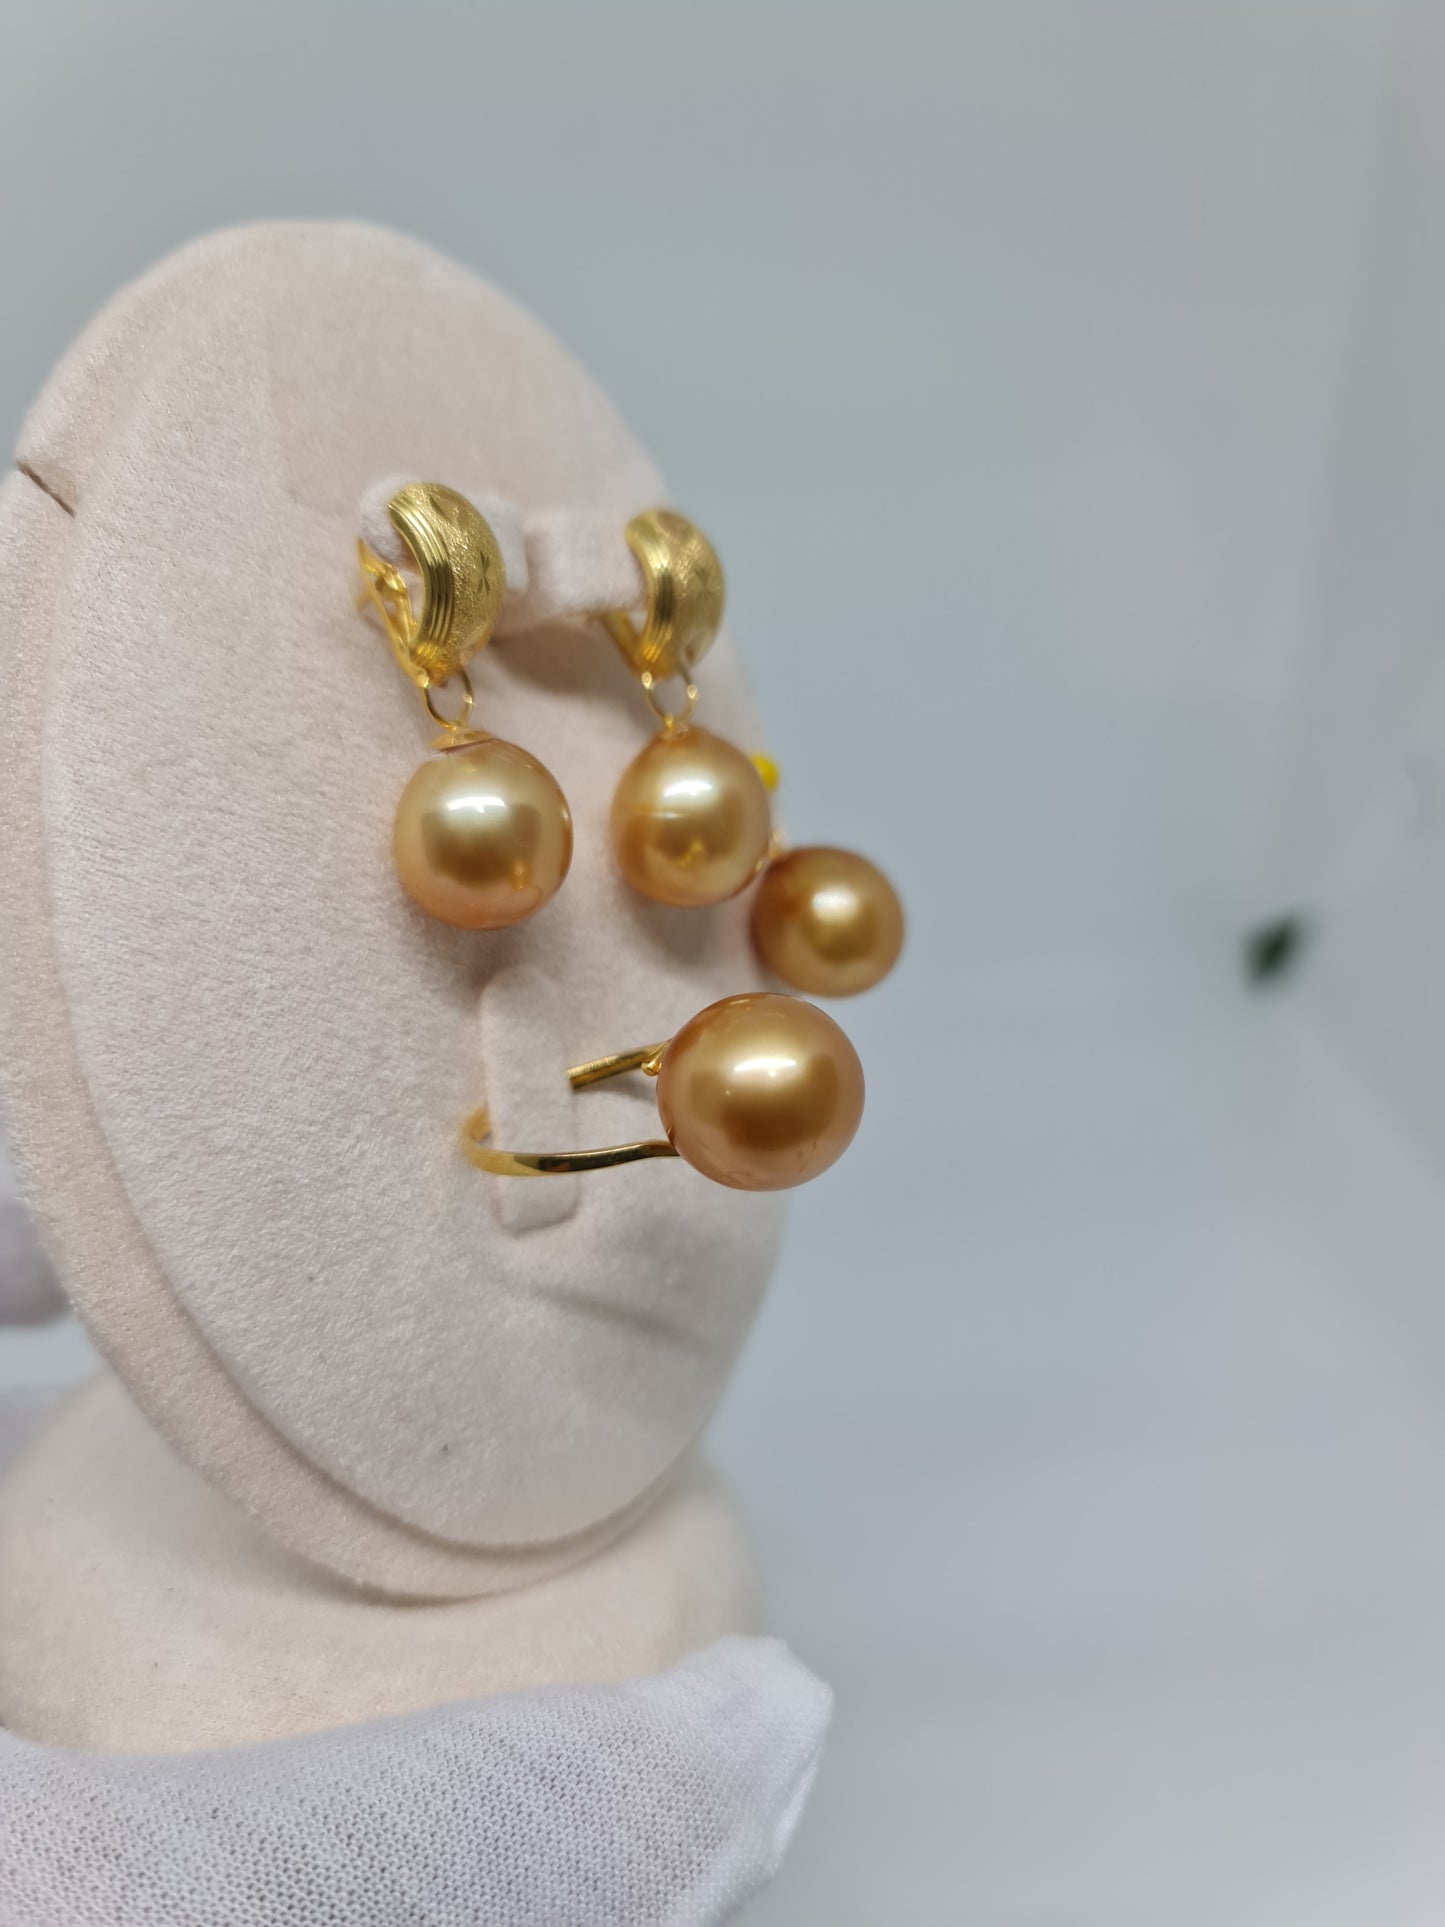 13.5mm Deep Golden South Sea Pearls Set in 18K and 14K Gold